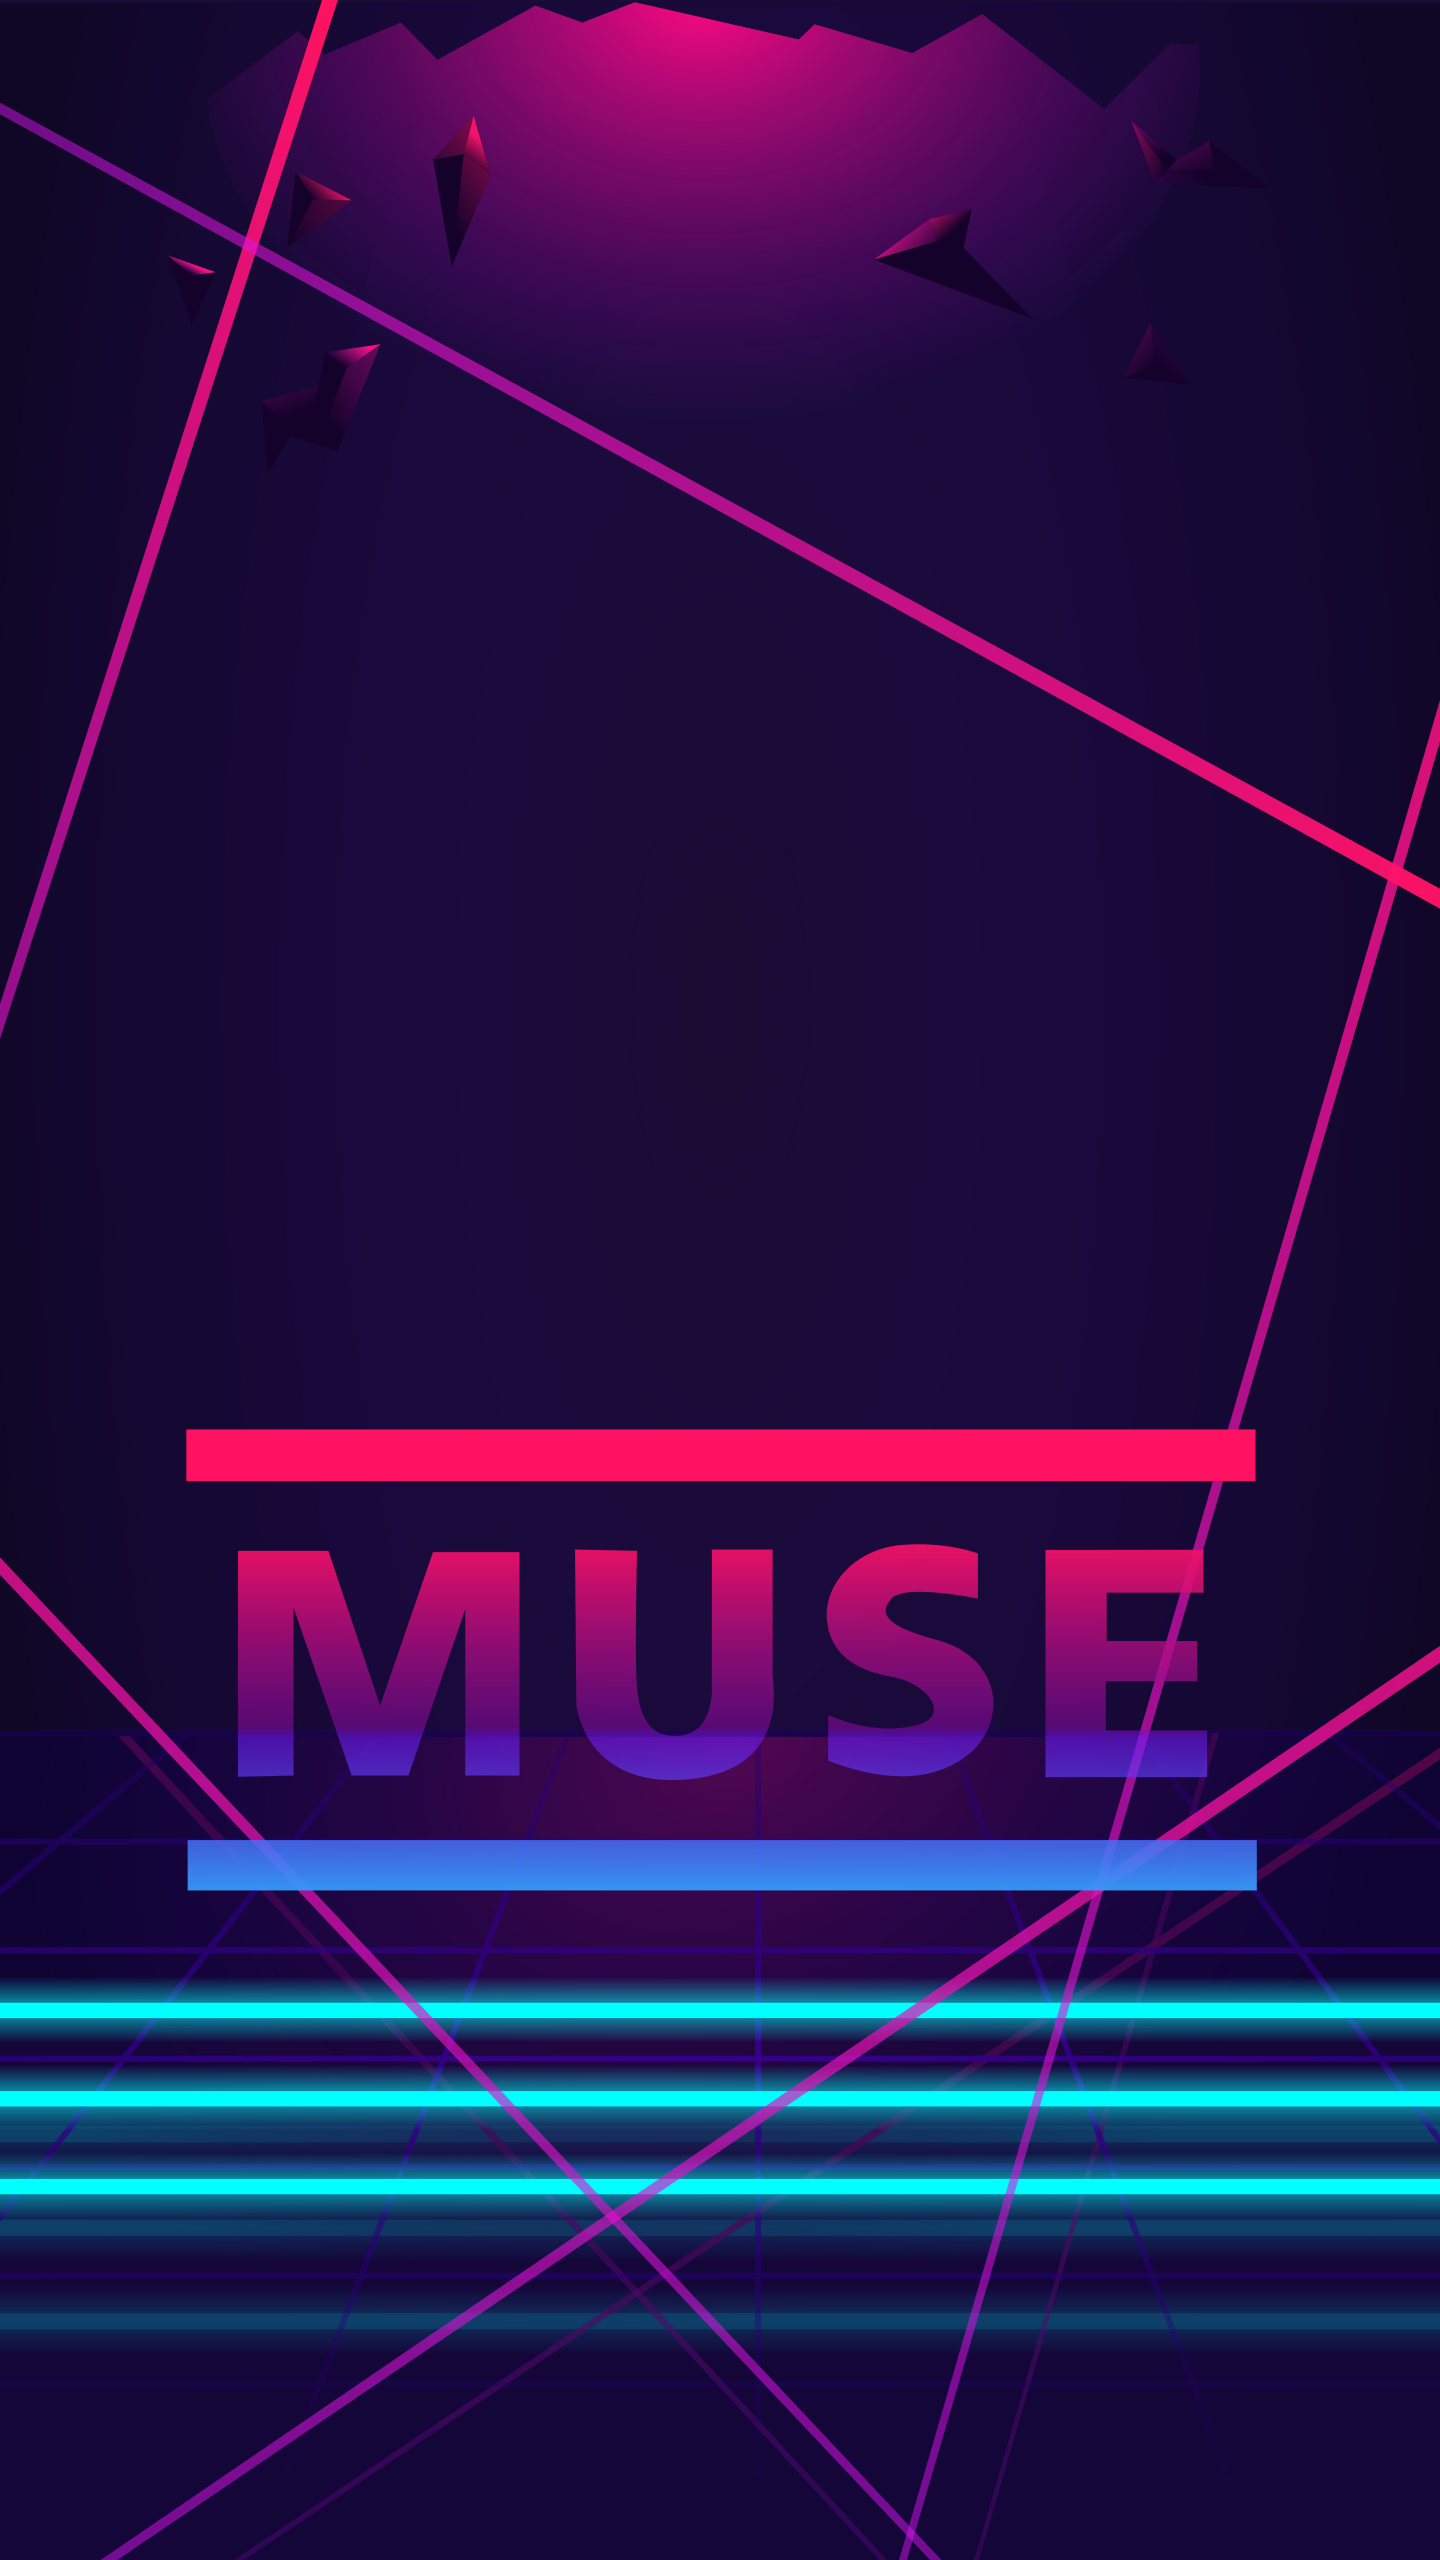 Muse Neutron Star Collision Love , HD Wallpaper & Backgrounds